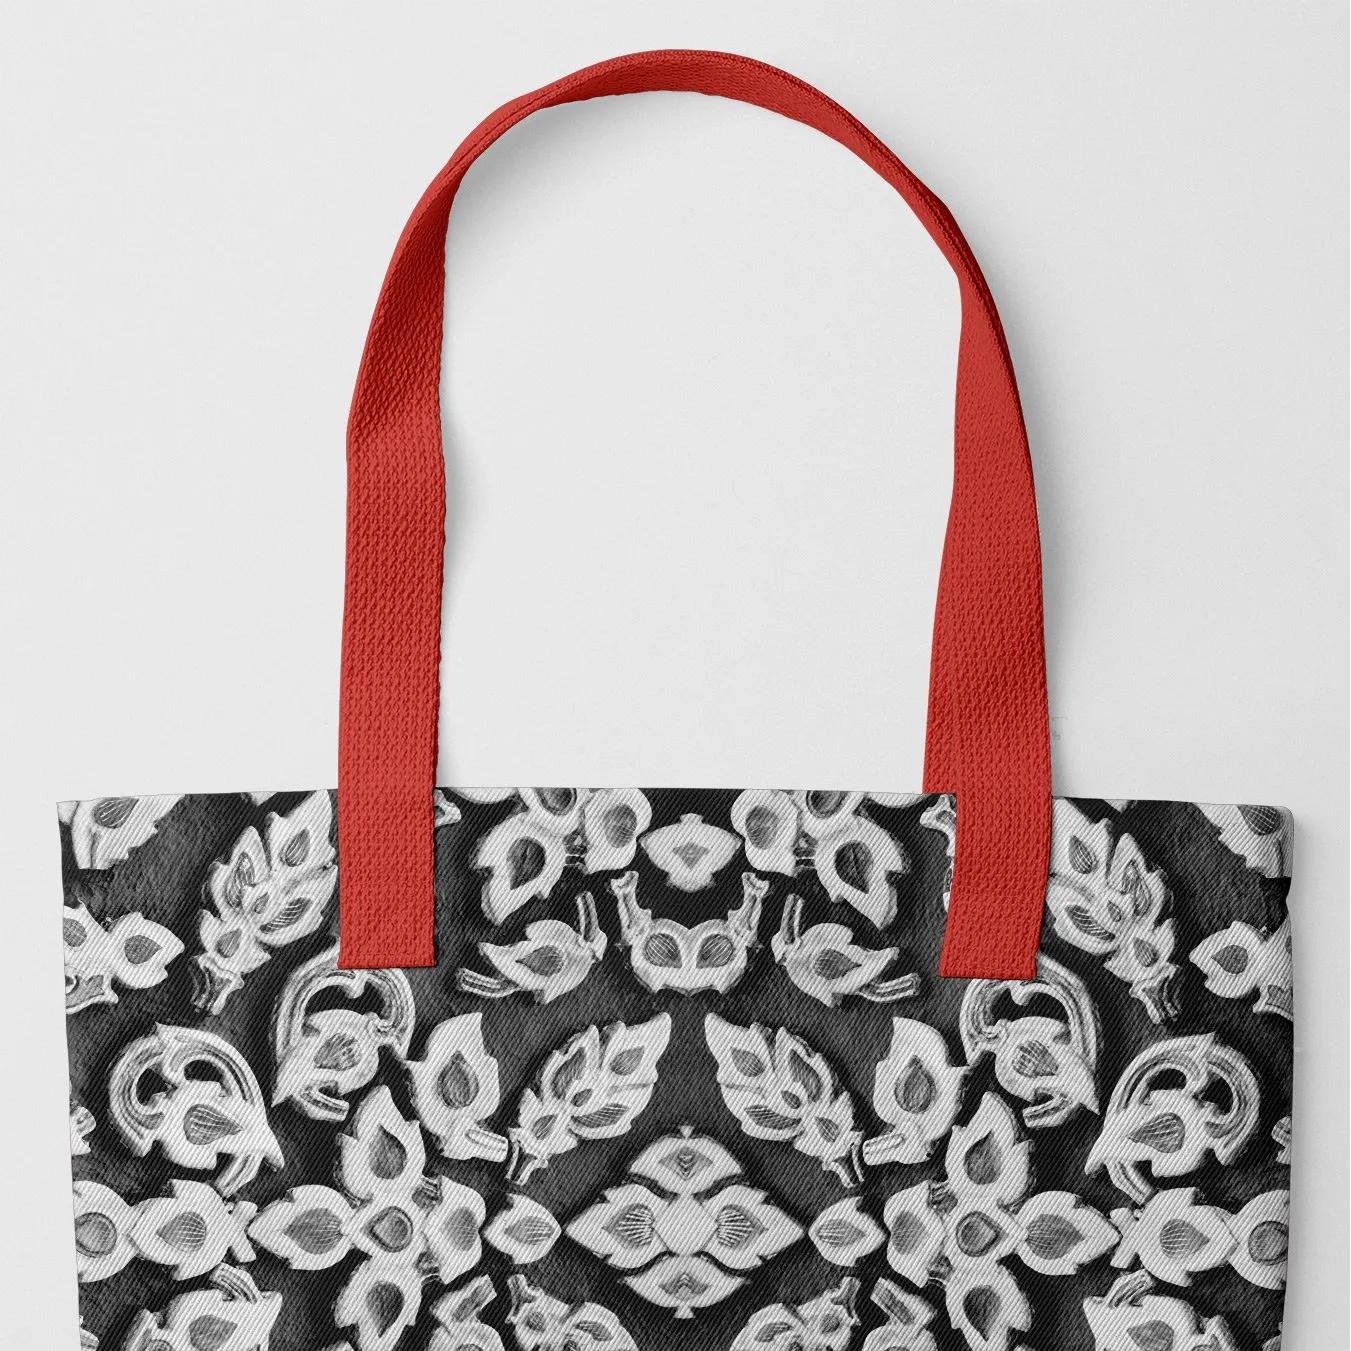 Ayodhya Tote - Black & White Traditional Thai Design Mosaic - Red Handles - Tote Bags - Aesthetic Art